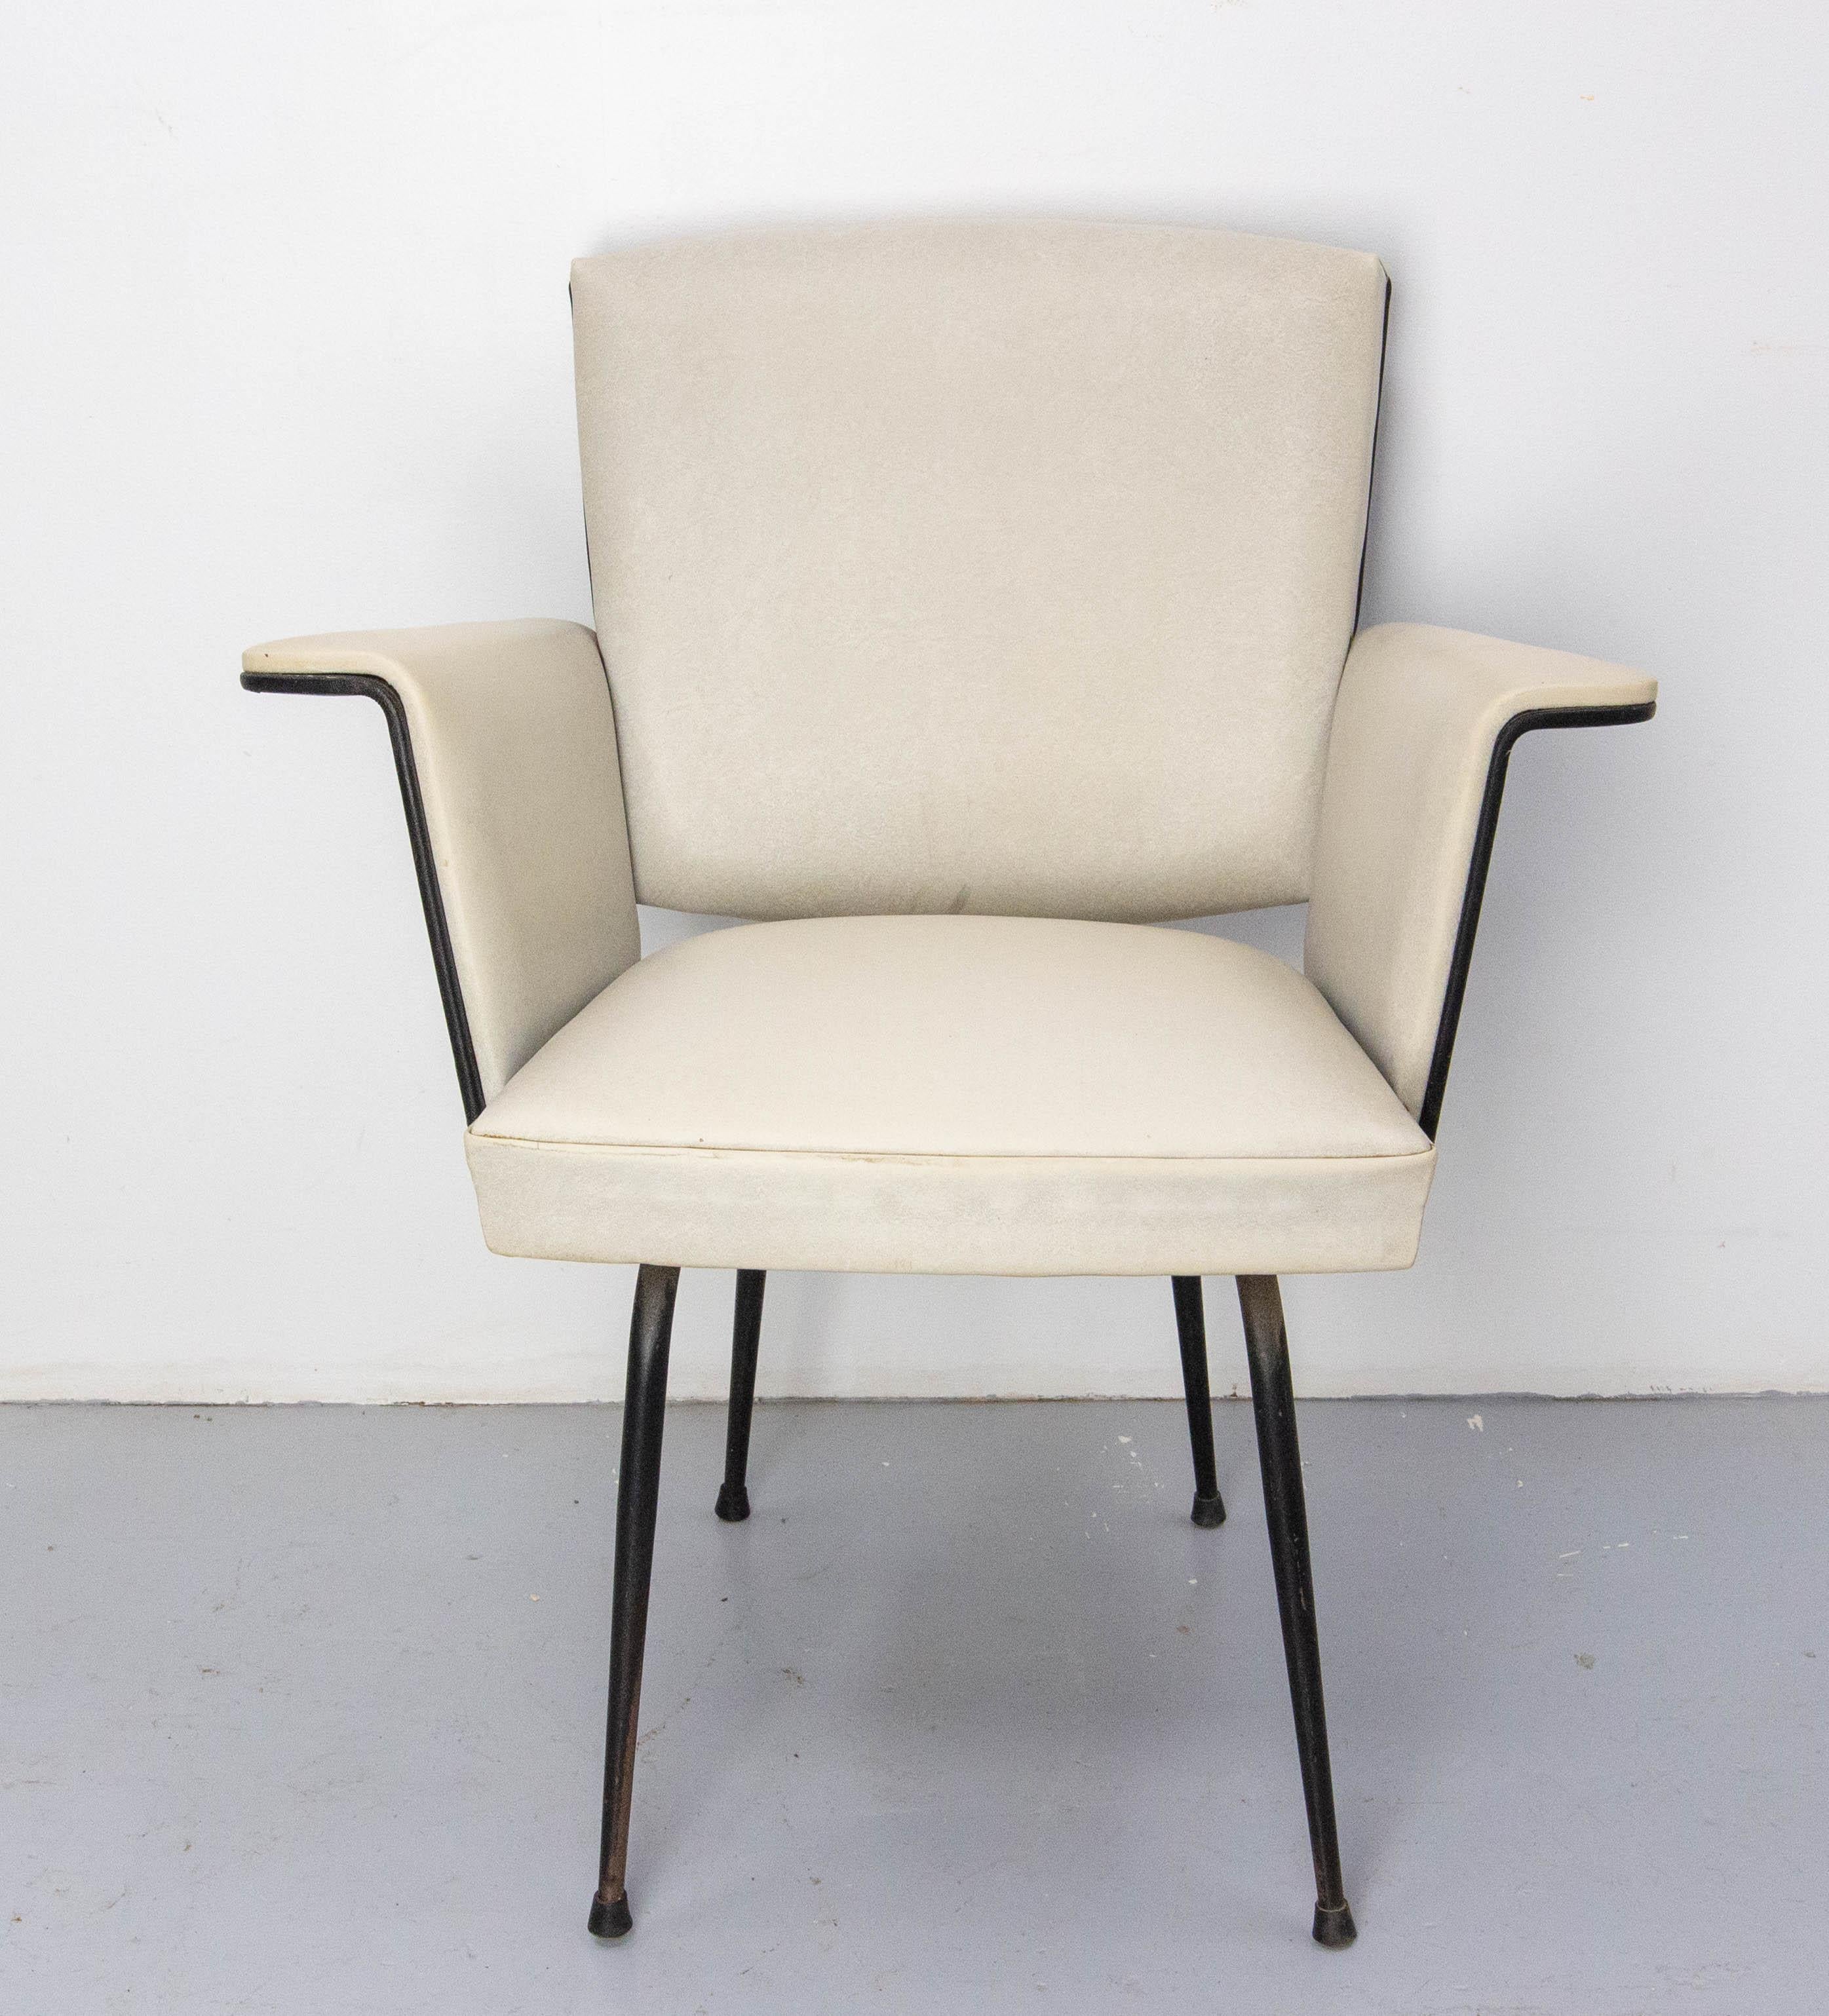 French chair made in very light grey and black made in the 20th mid-century on a black painted base.
Good condition with a mark on the seat (please see last photo)

Shipping:
65 / 70 / 80 cm 9.7 kg.
    